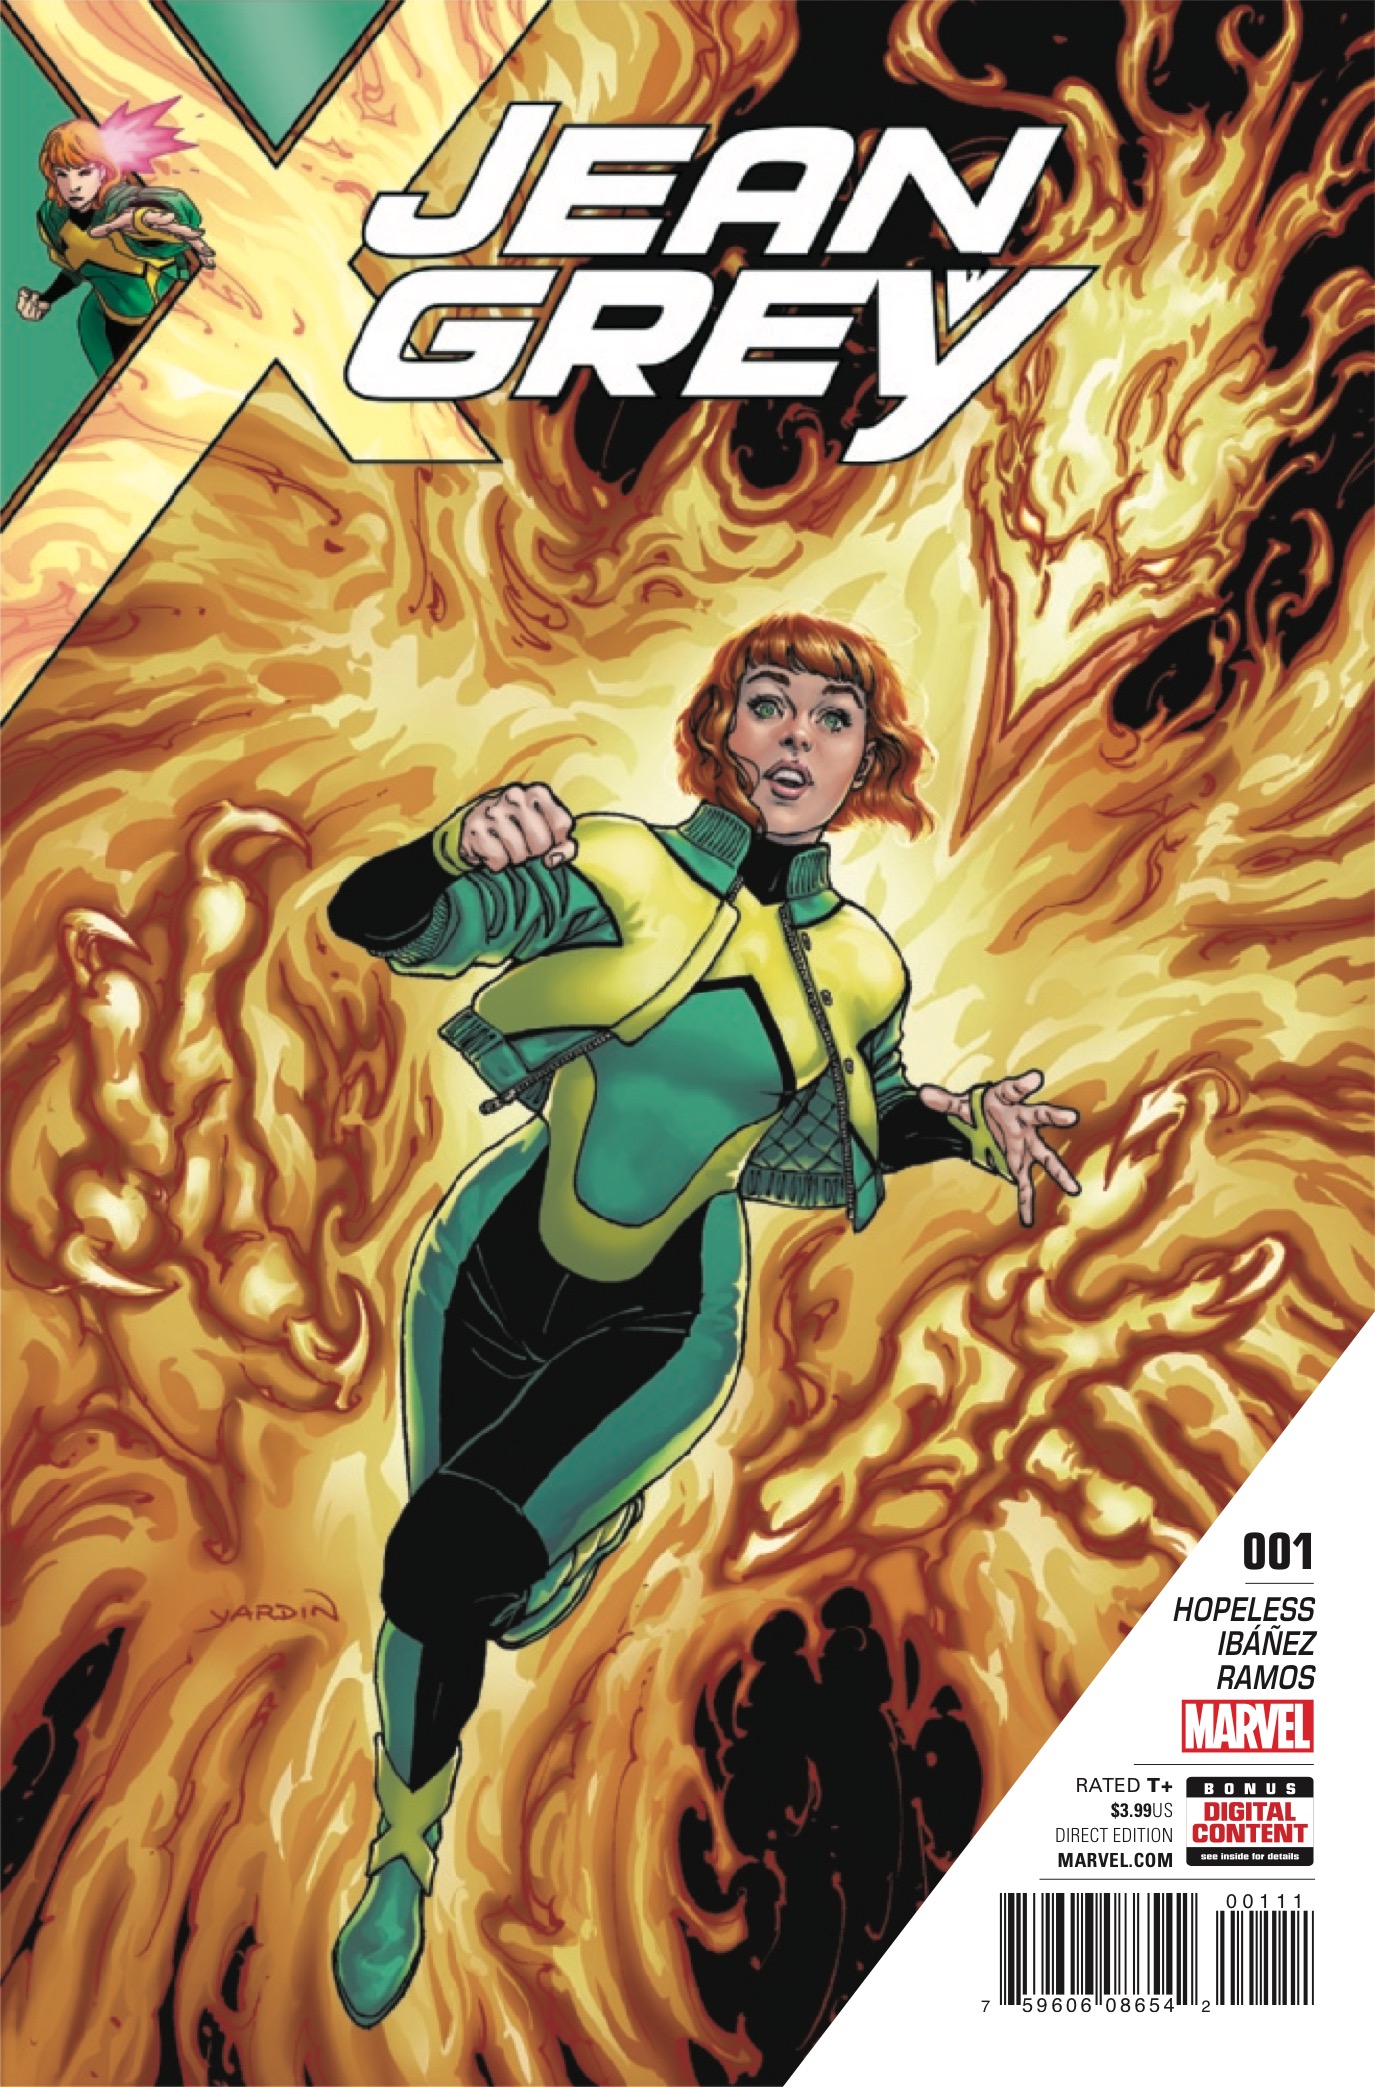 Jean Grey #1 Review